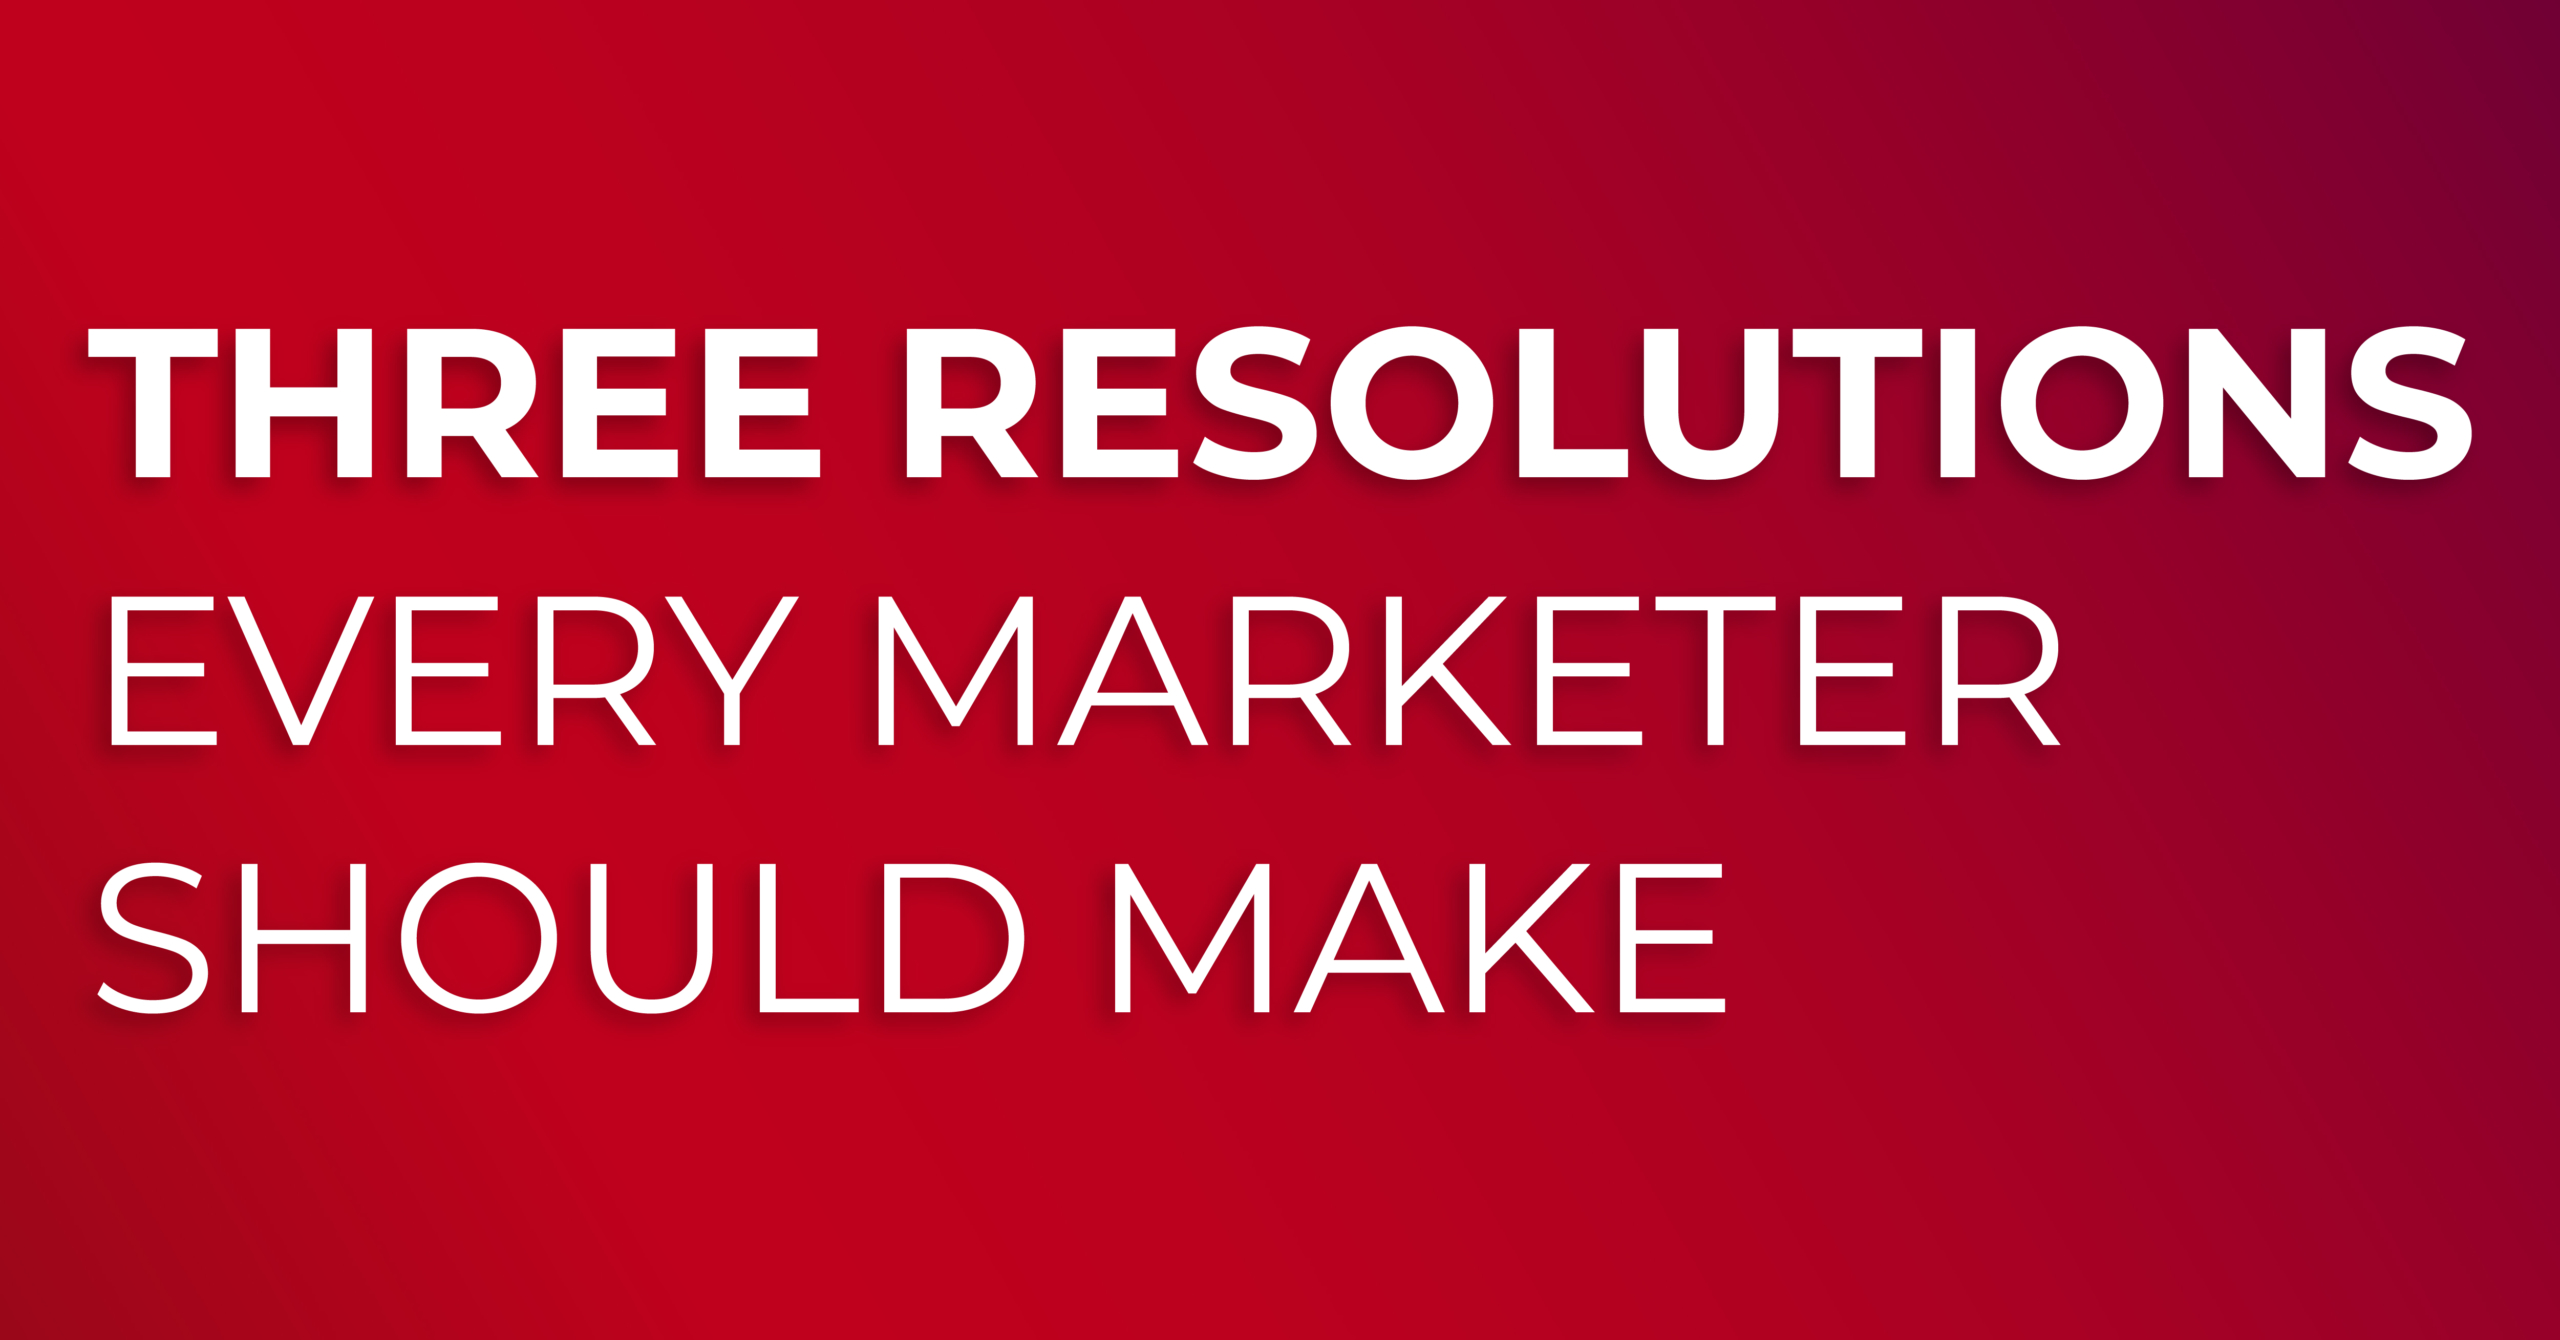 Three Resolutions Every Marketer Should Make